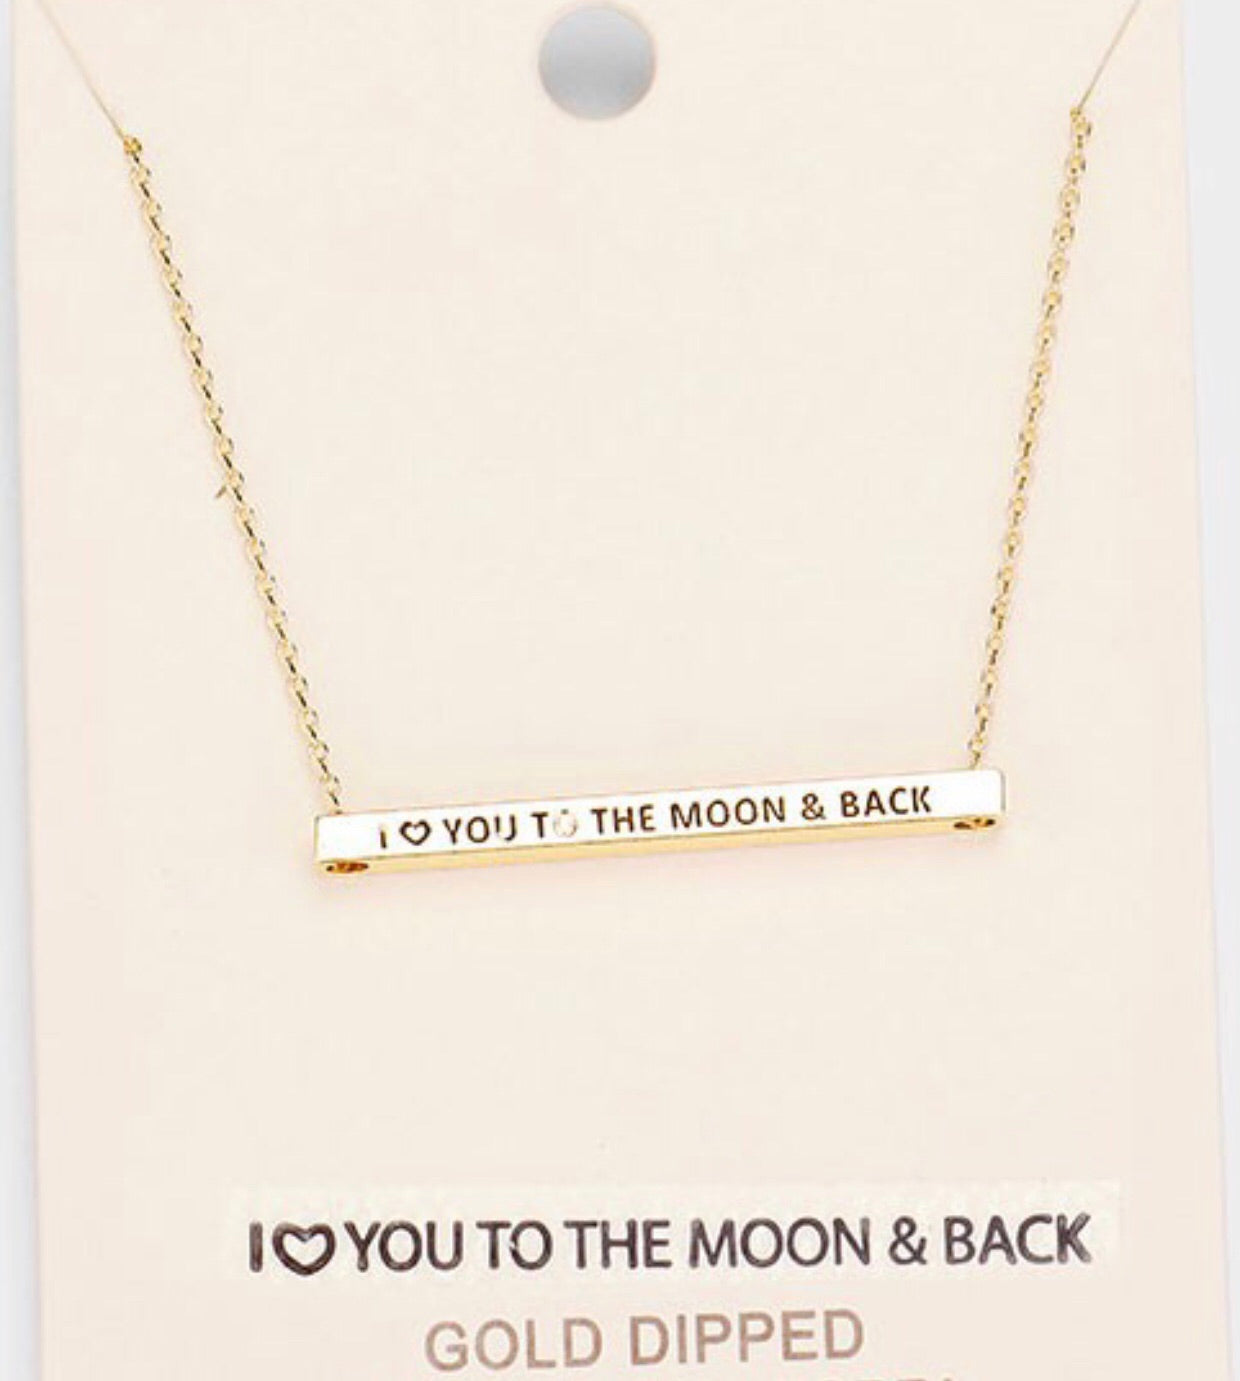 I heart you to the moon and back necklace - Alexa Maries